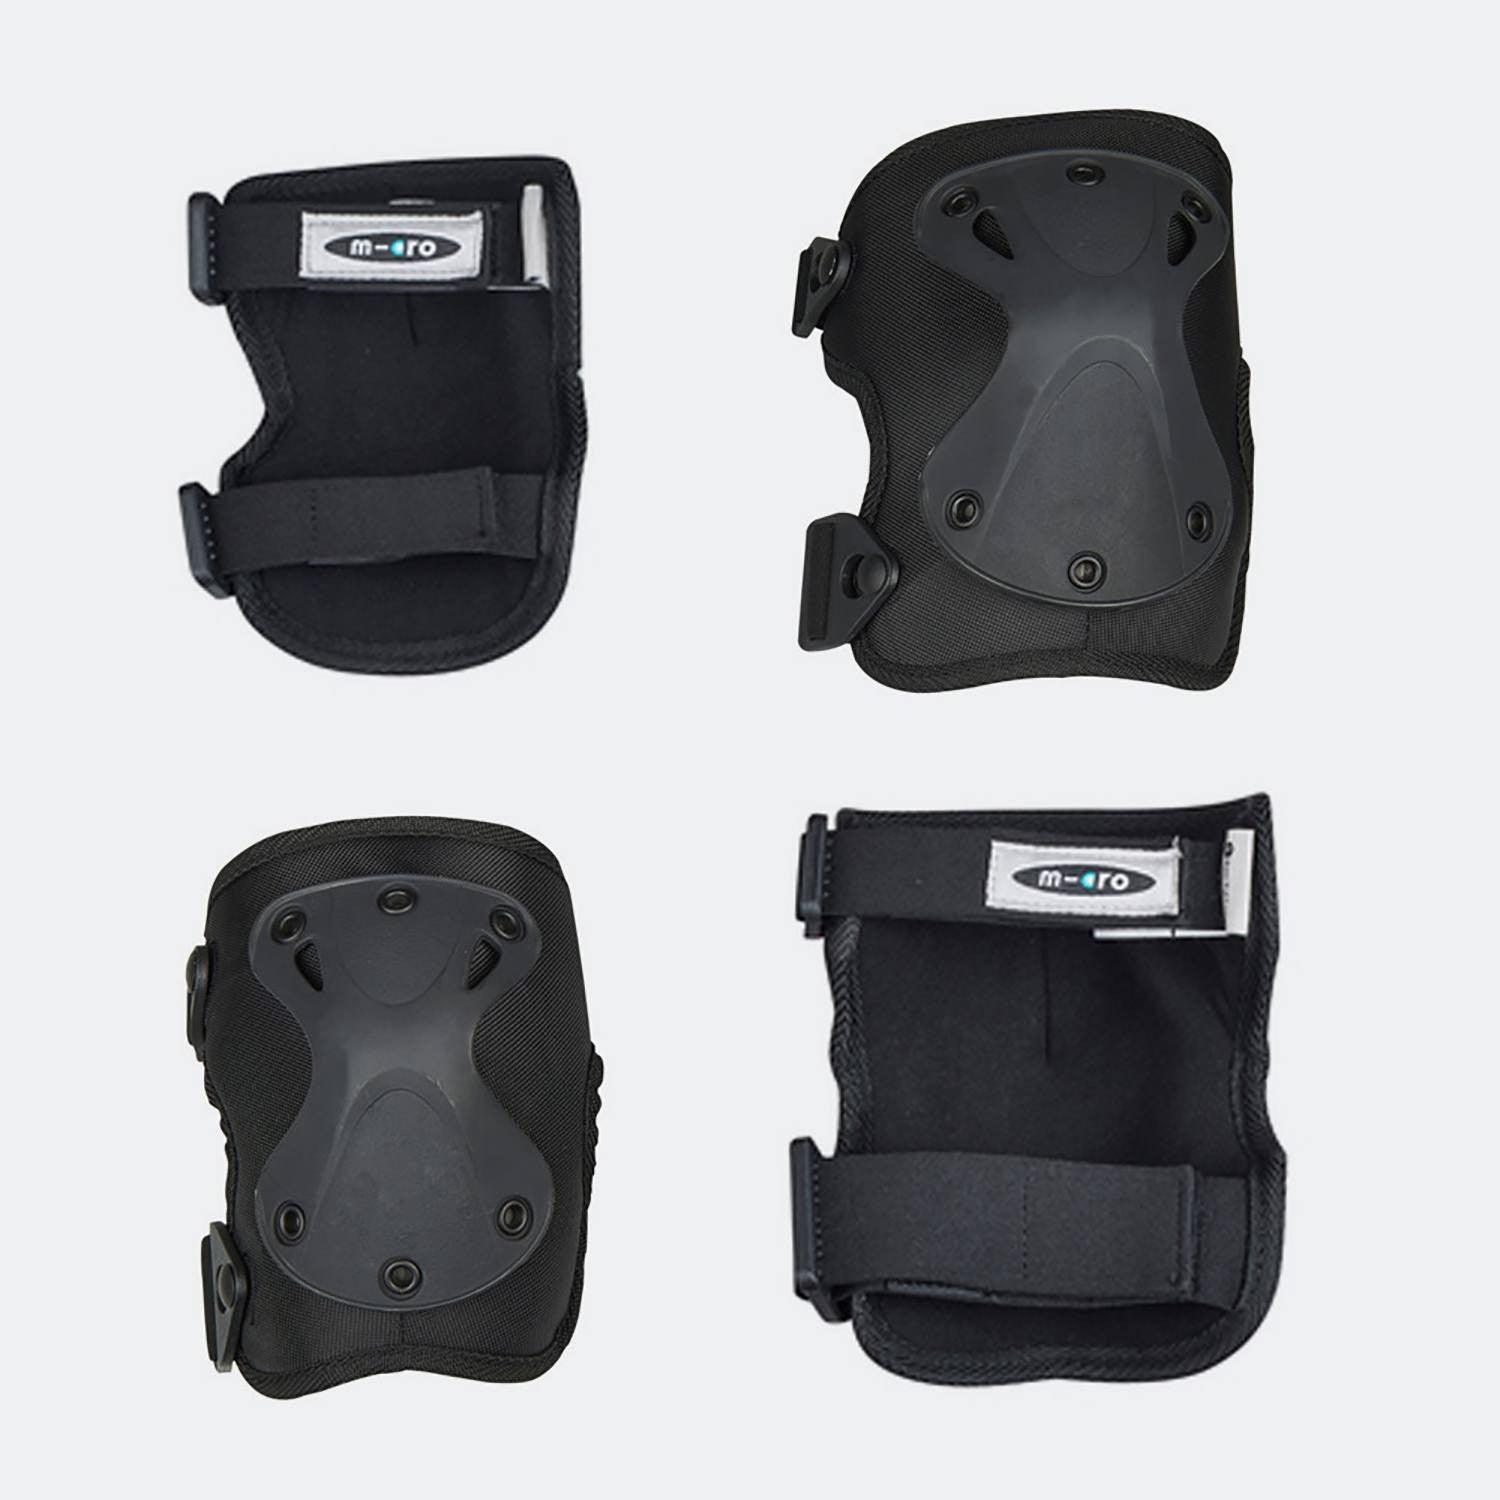 Micro: knee pads and elbow pads S 3-7 years old